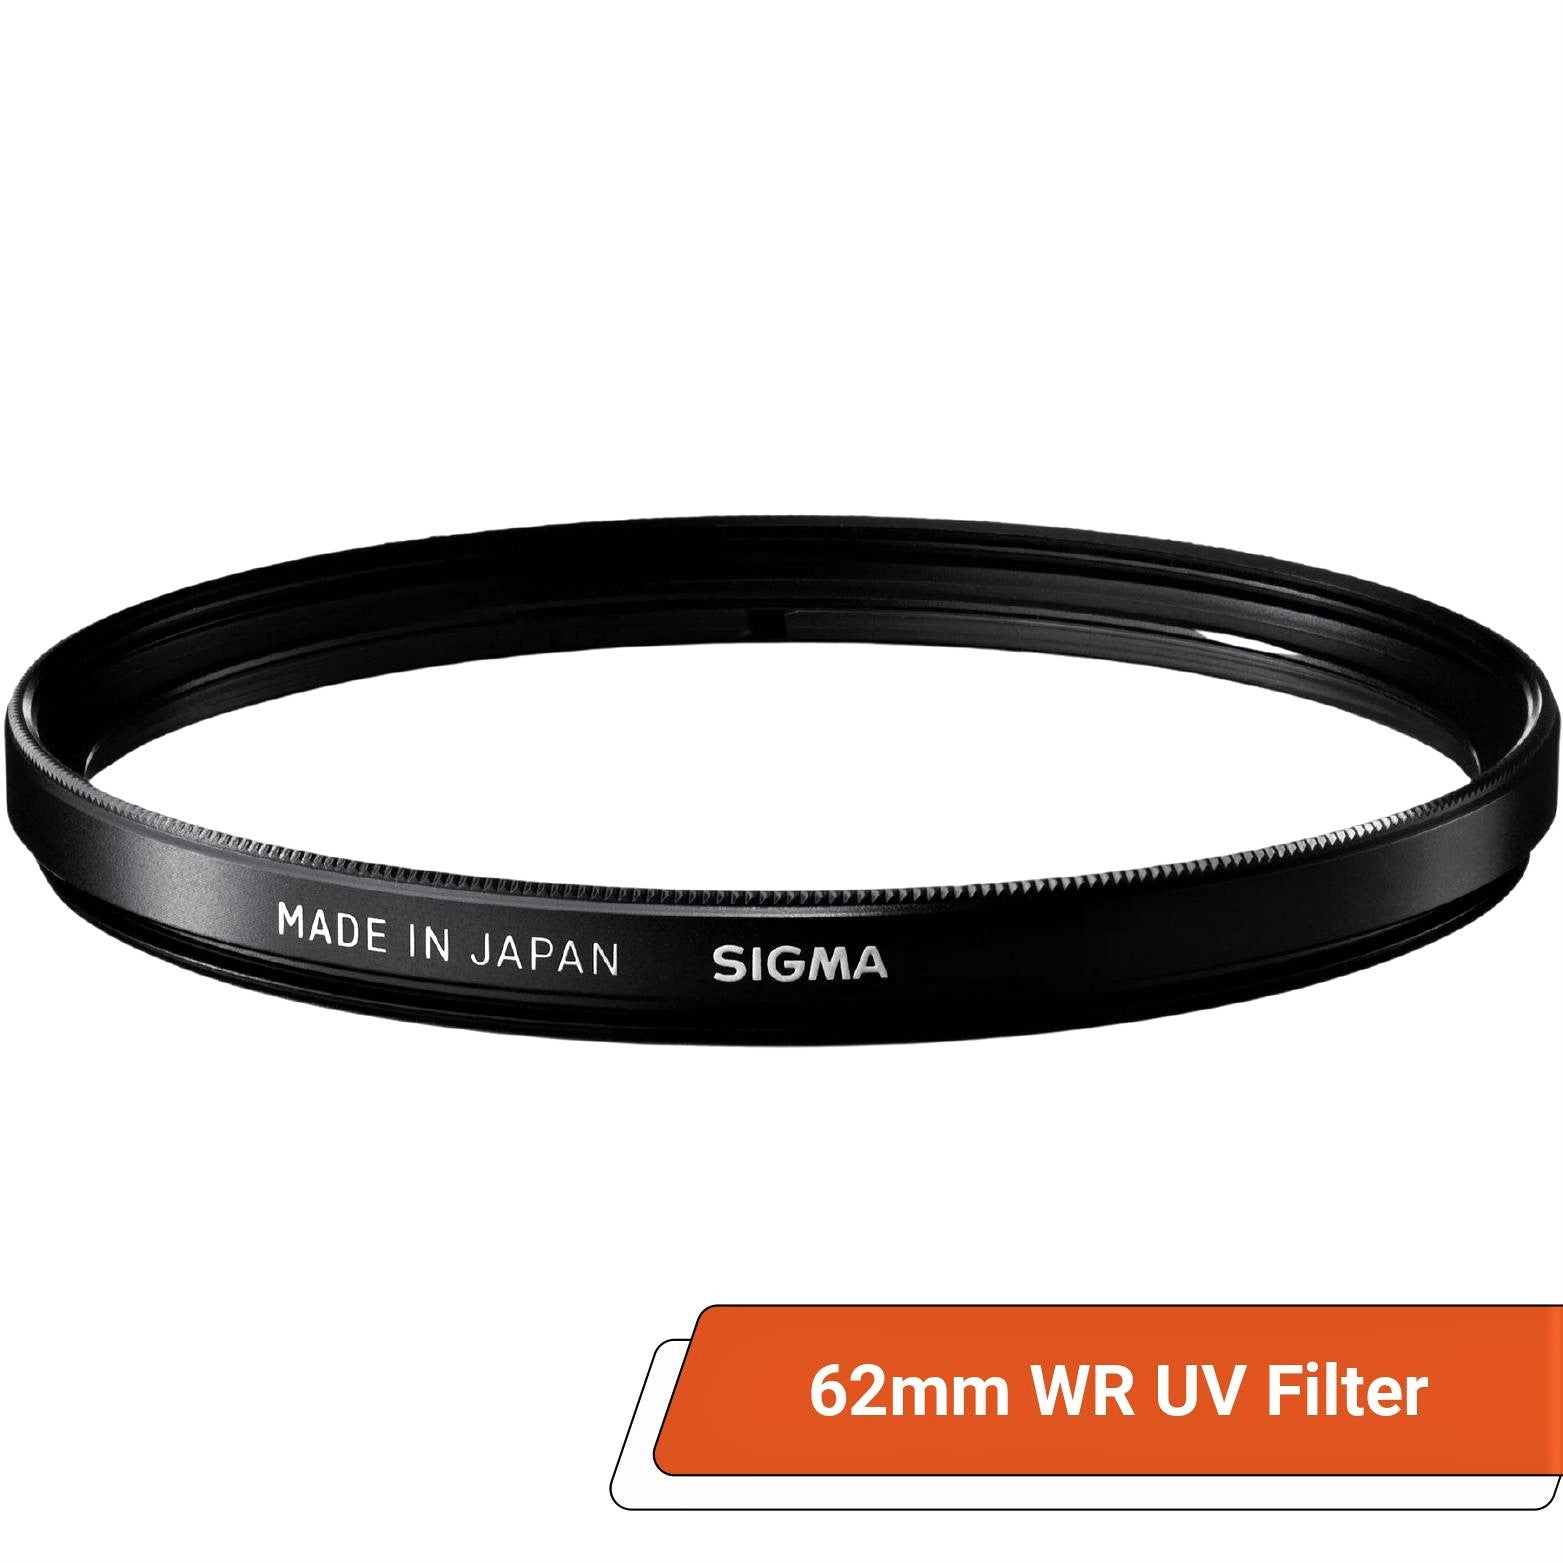 Sigma 62mm WR (Water Repellent) UV Filter